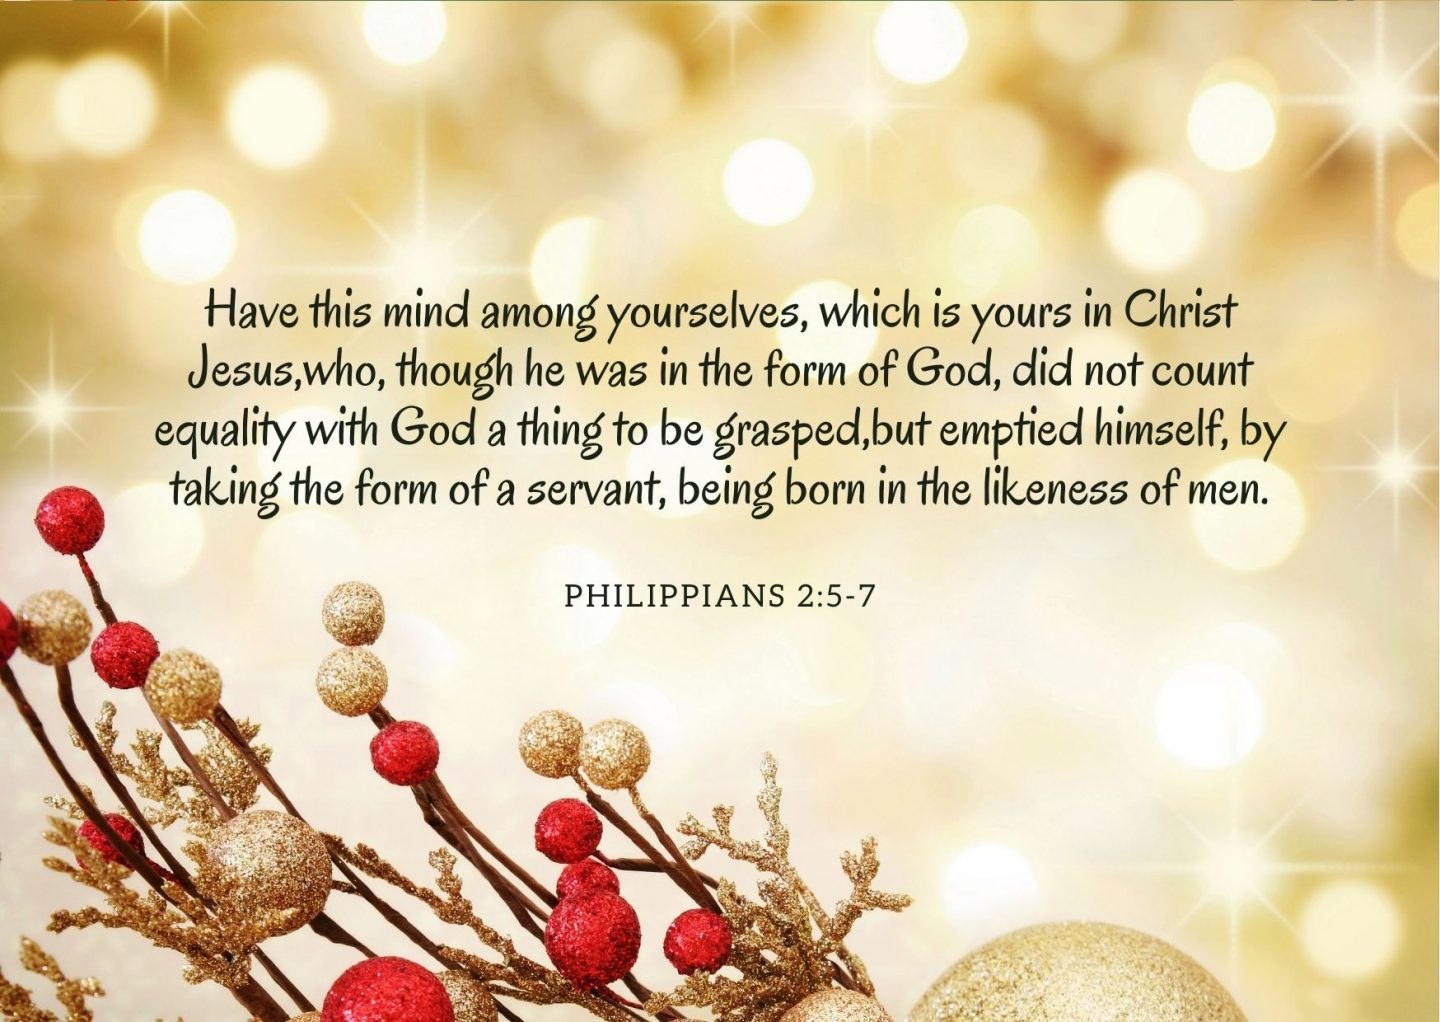 Have this mind among yourselves, which is yours in Christ Jesus,who, though he was in the form of God, did not count equality with God a thing to be grasped,but emptied himself, by taking the form of a servant, being born in the likeness of men. Philippians 2:5-7